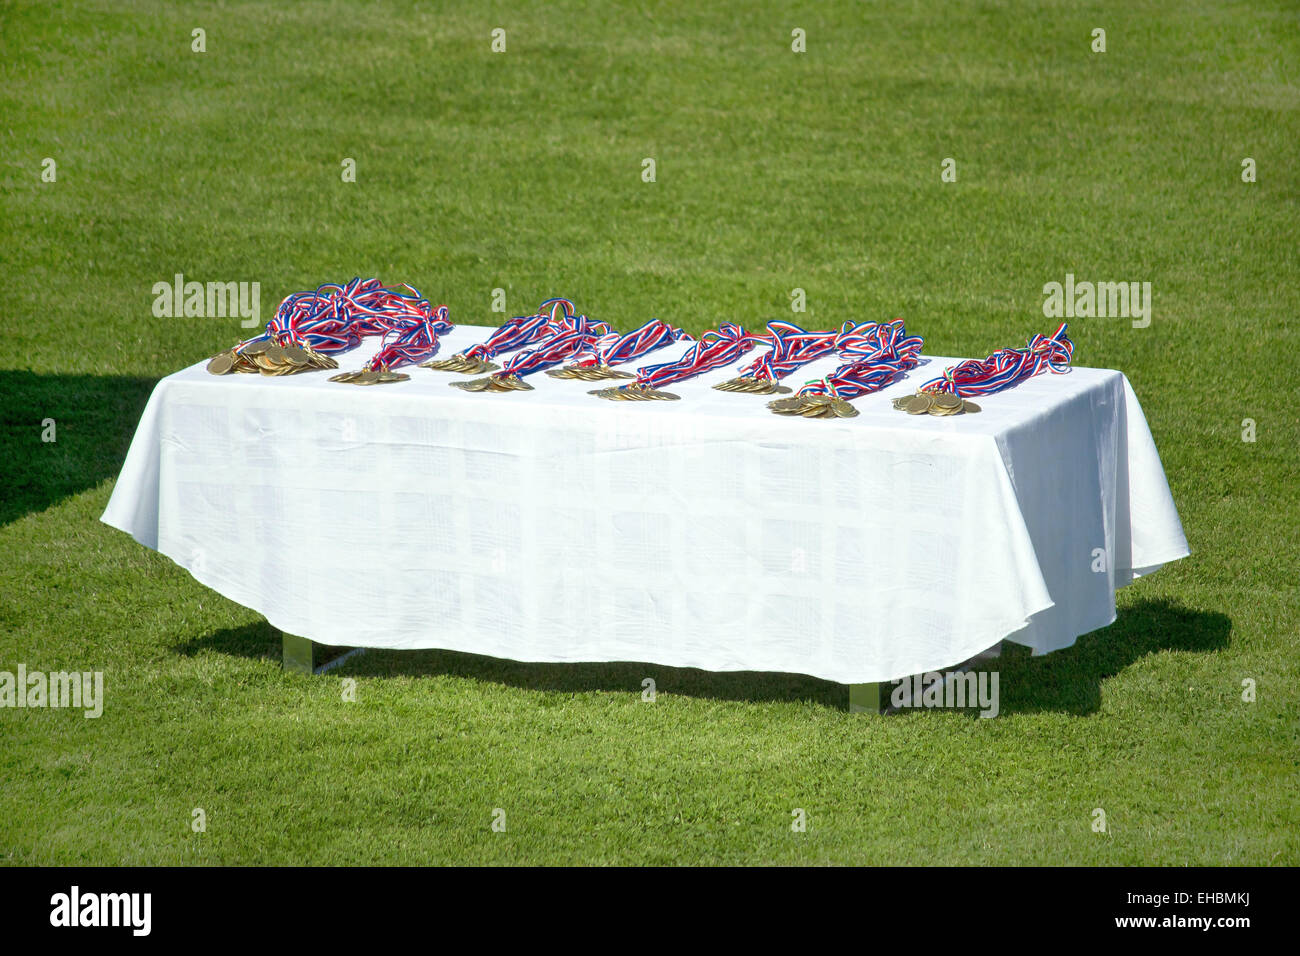 Sport medals on footbal field Stock Photo